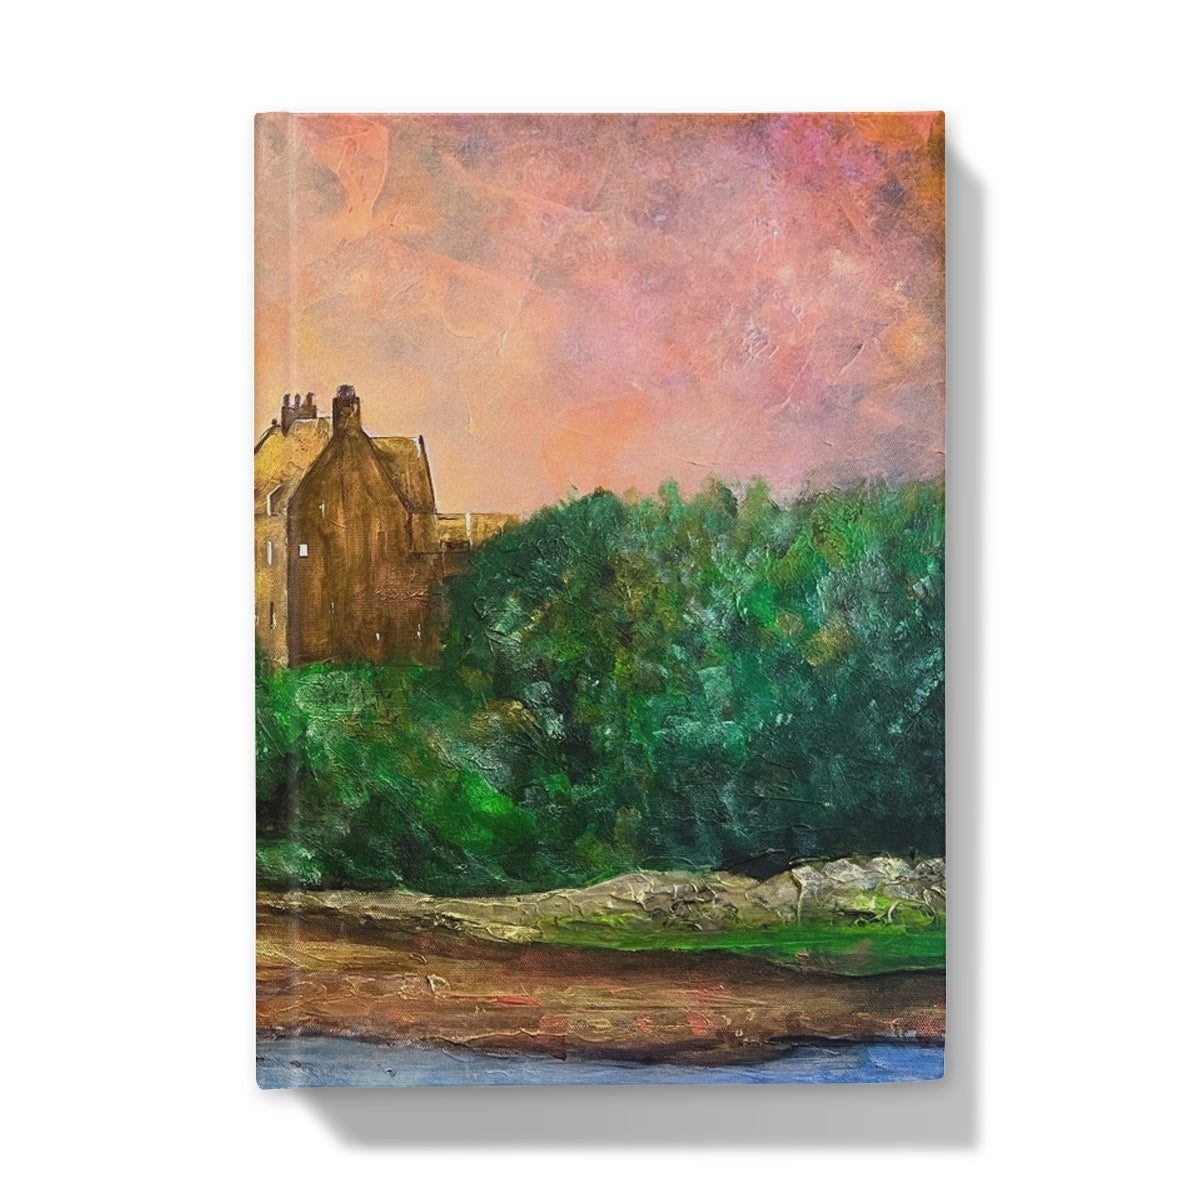 Duntrune Castle Art Gifts Hardback Journal-Journals & Notebooks-Historic & Iconic Scotland Art Gallery-A5-Plain-Paintings, Prints, Homeware, Art Gifts From Scotland By Scottish Artist Kevin Hunter